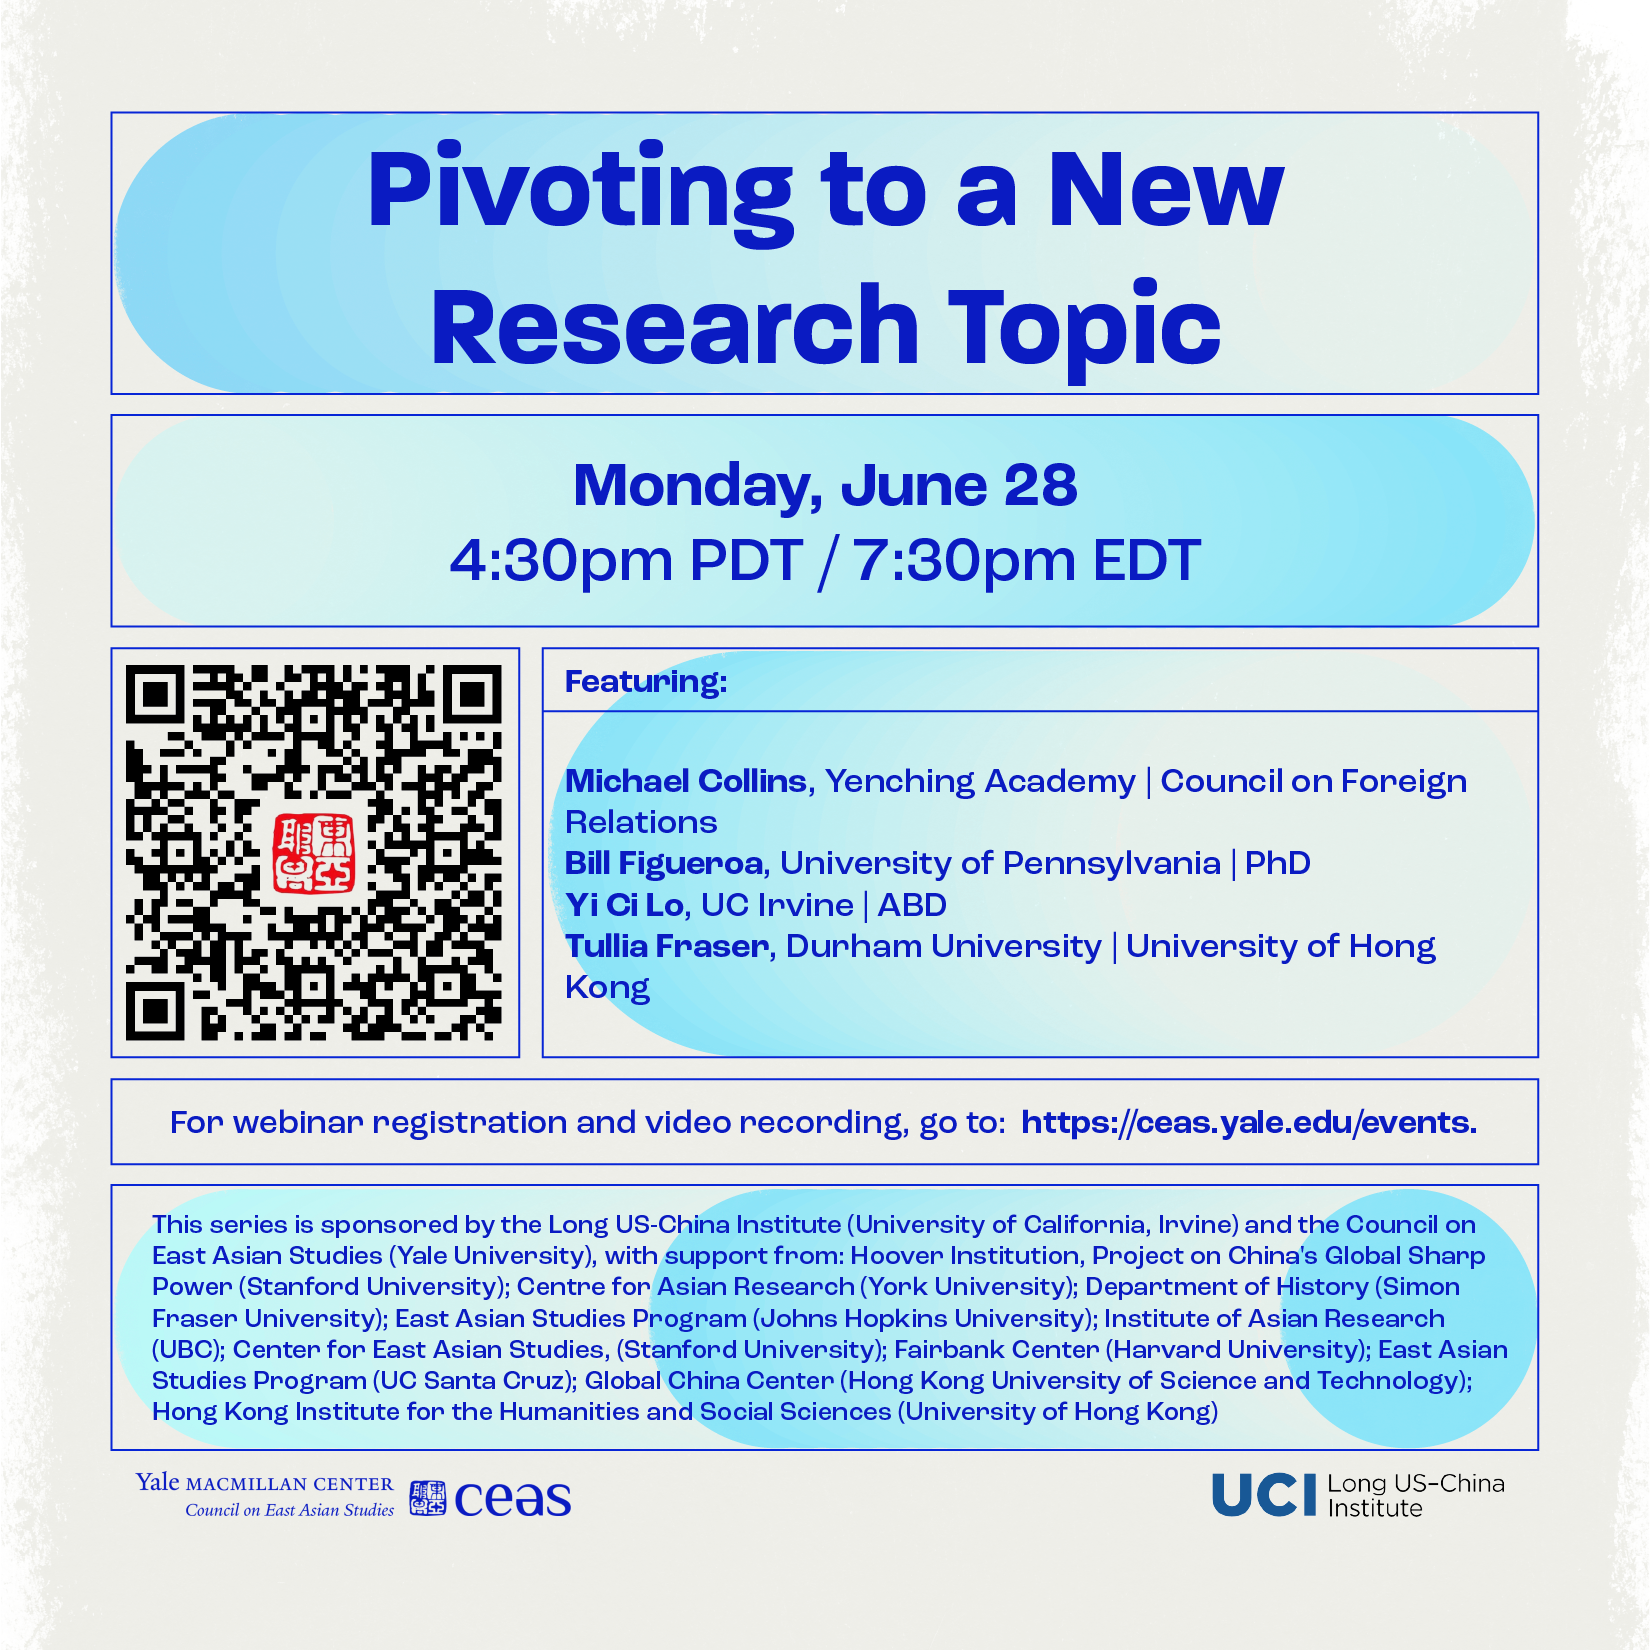 Doing Chinese History (in a New Era) Webinar Series on “Pivoting to a New Research Topic” (June 28, 2021)